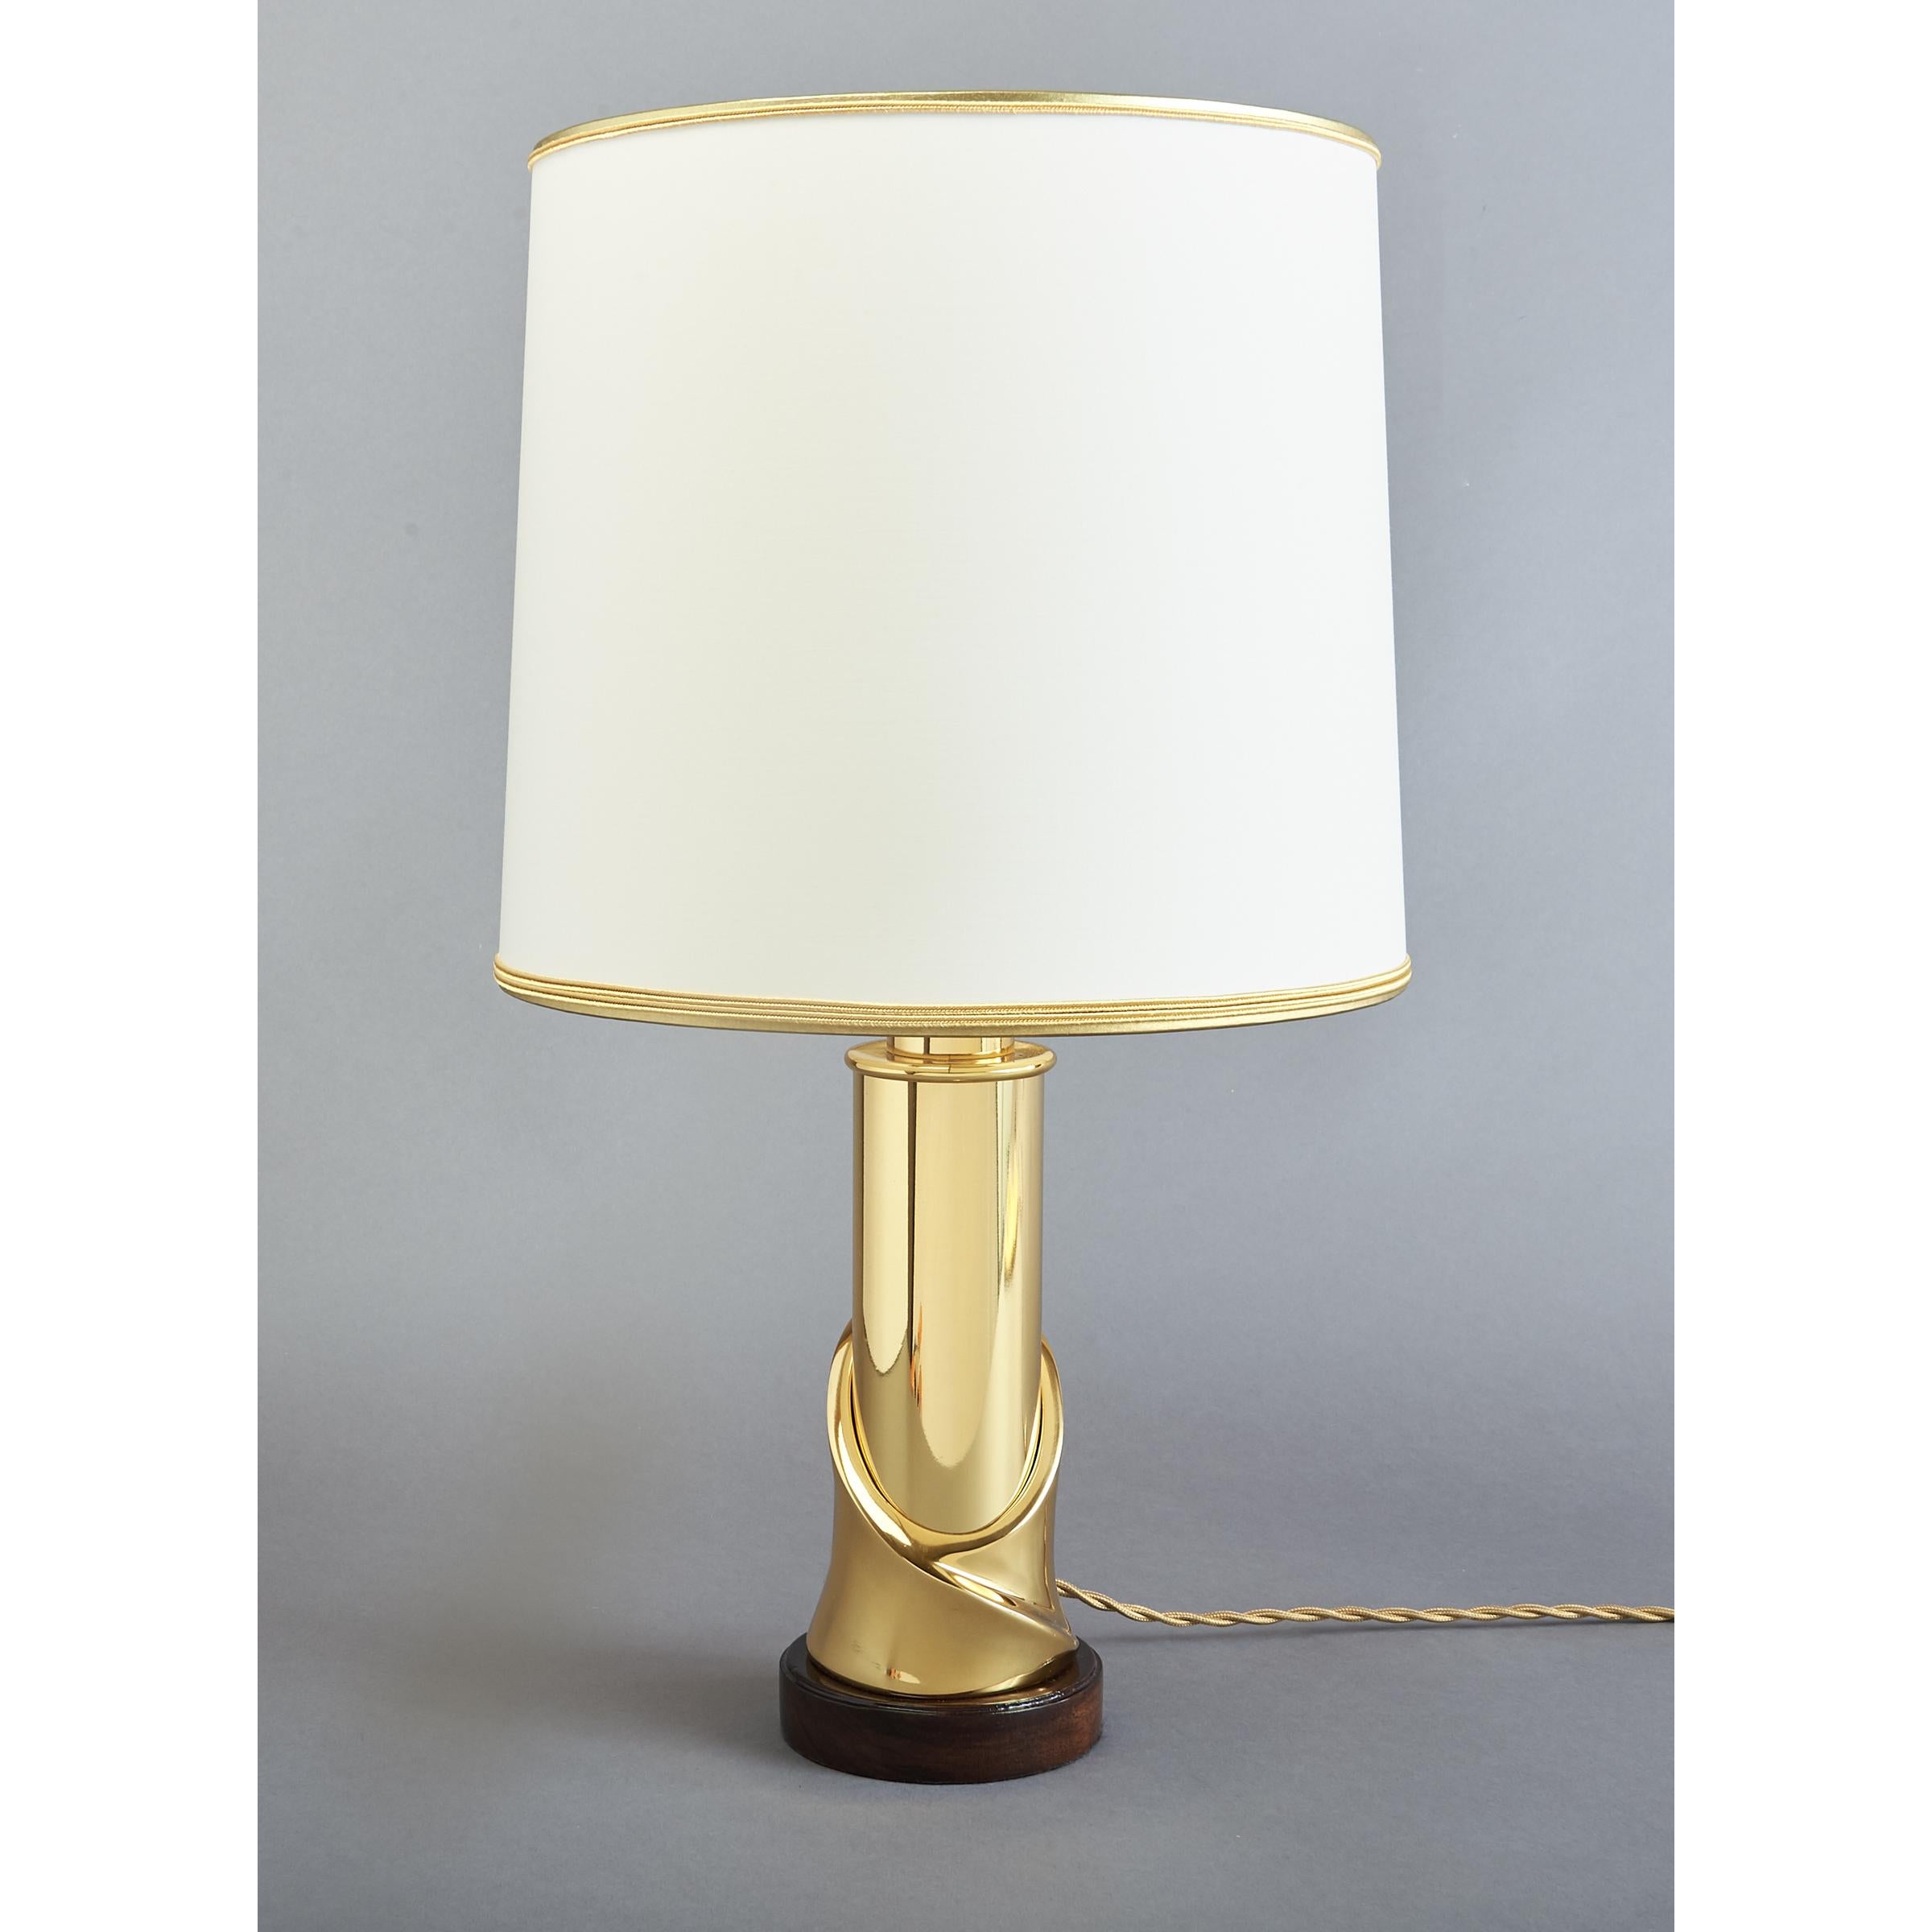 Italian Pair of Sculptural Polished Brass Table Lamps, 1970's